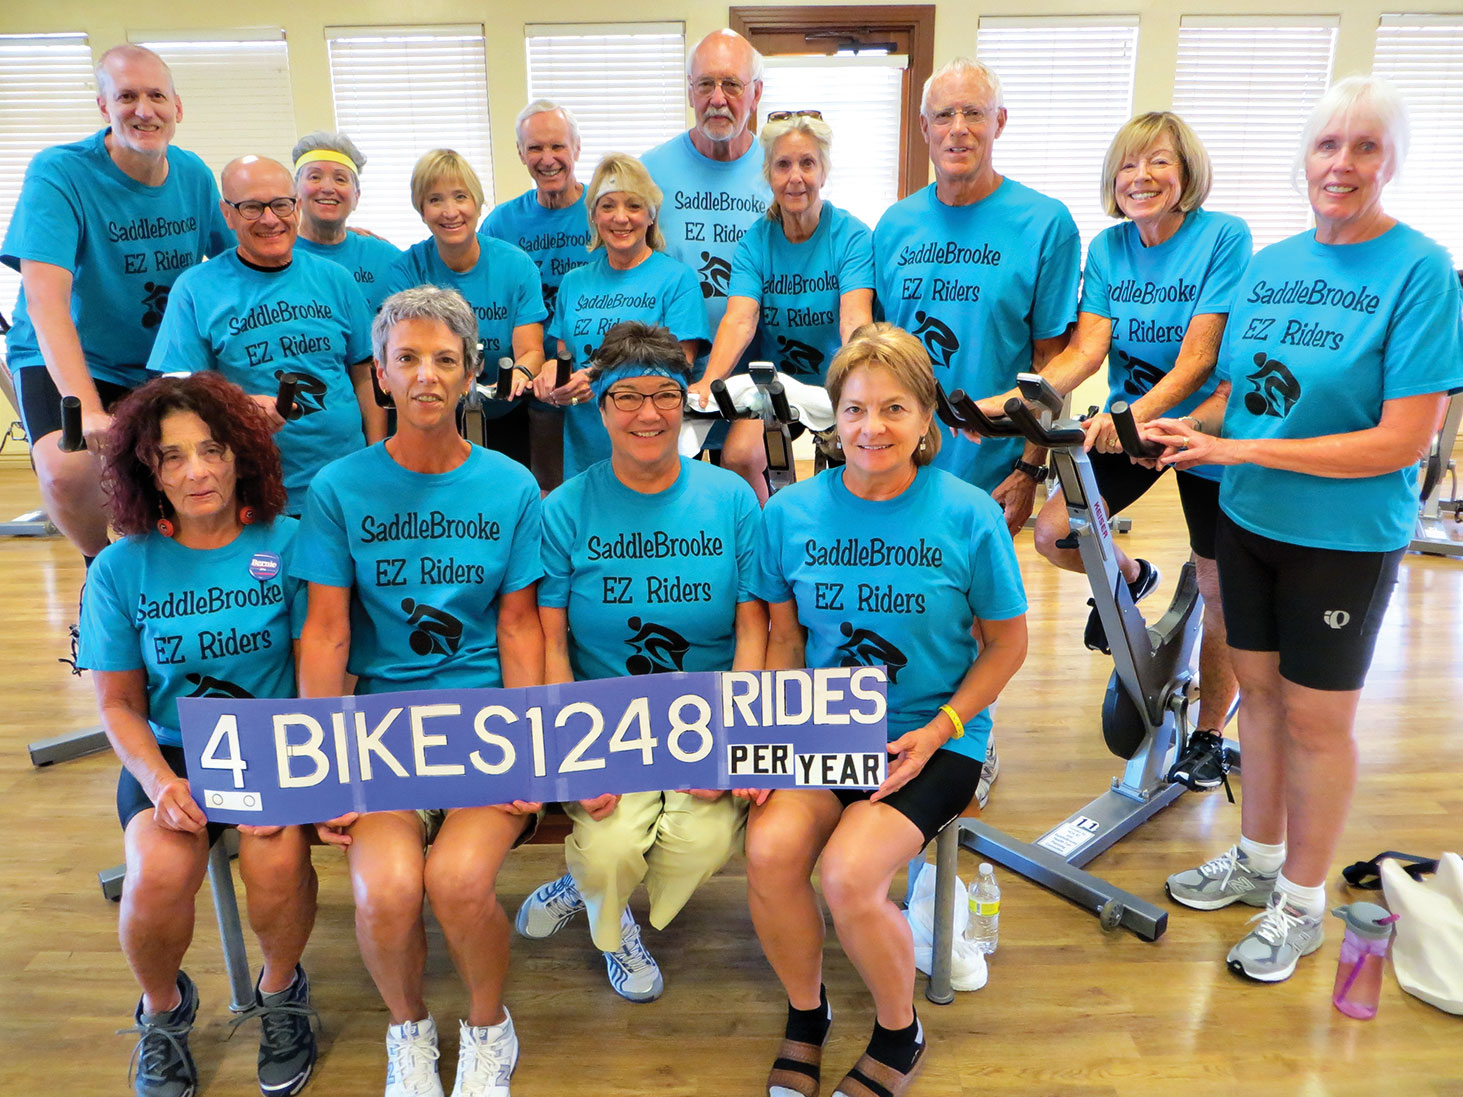 SaddleBrooke EZ Riders riding to four bikes and 1248 riders per year! Front: Elisa Hauptman, Fran Weinberg, Ruth Leman and Jean Lillis; back: Dave Palmeri, Dale leman, Phoebe Bax, Linda Wilberg, Ron Reagan, Cheryl Mundy, Paul Swane, Susie Proust, Bill Powell, Marje Valenti and Suzanne Reagan; photo by Jim Ryan